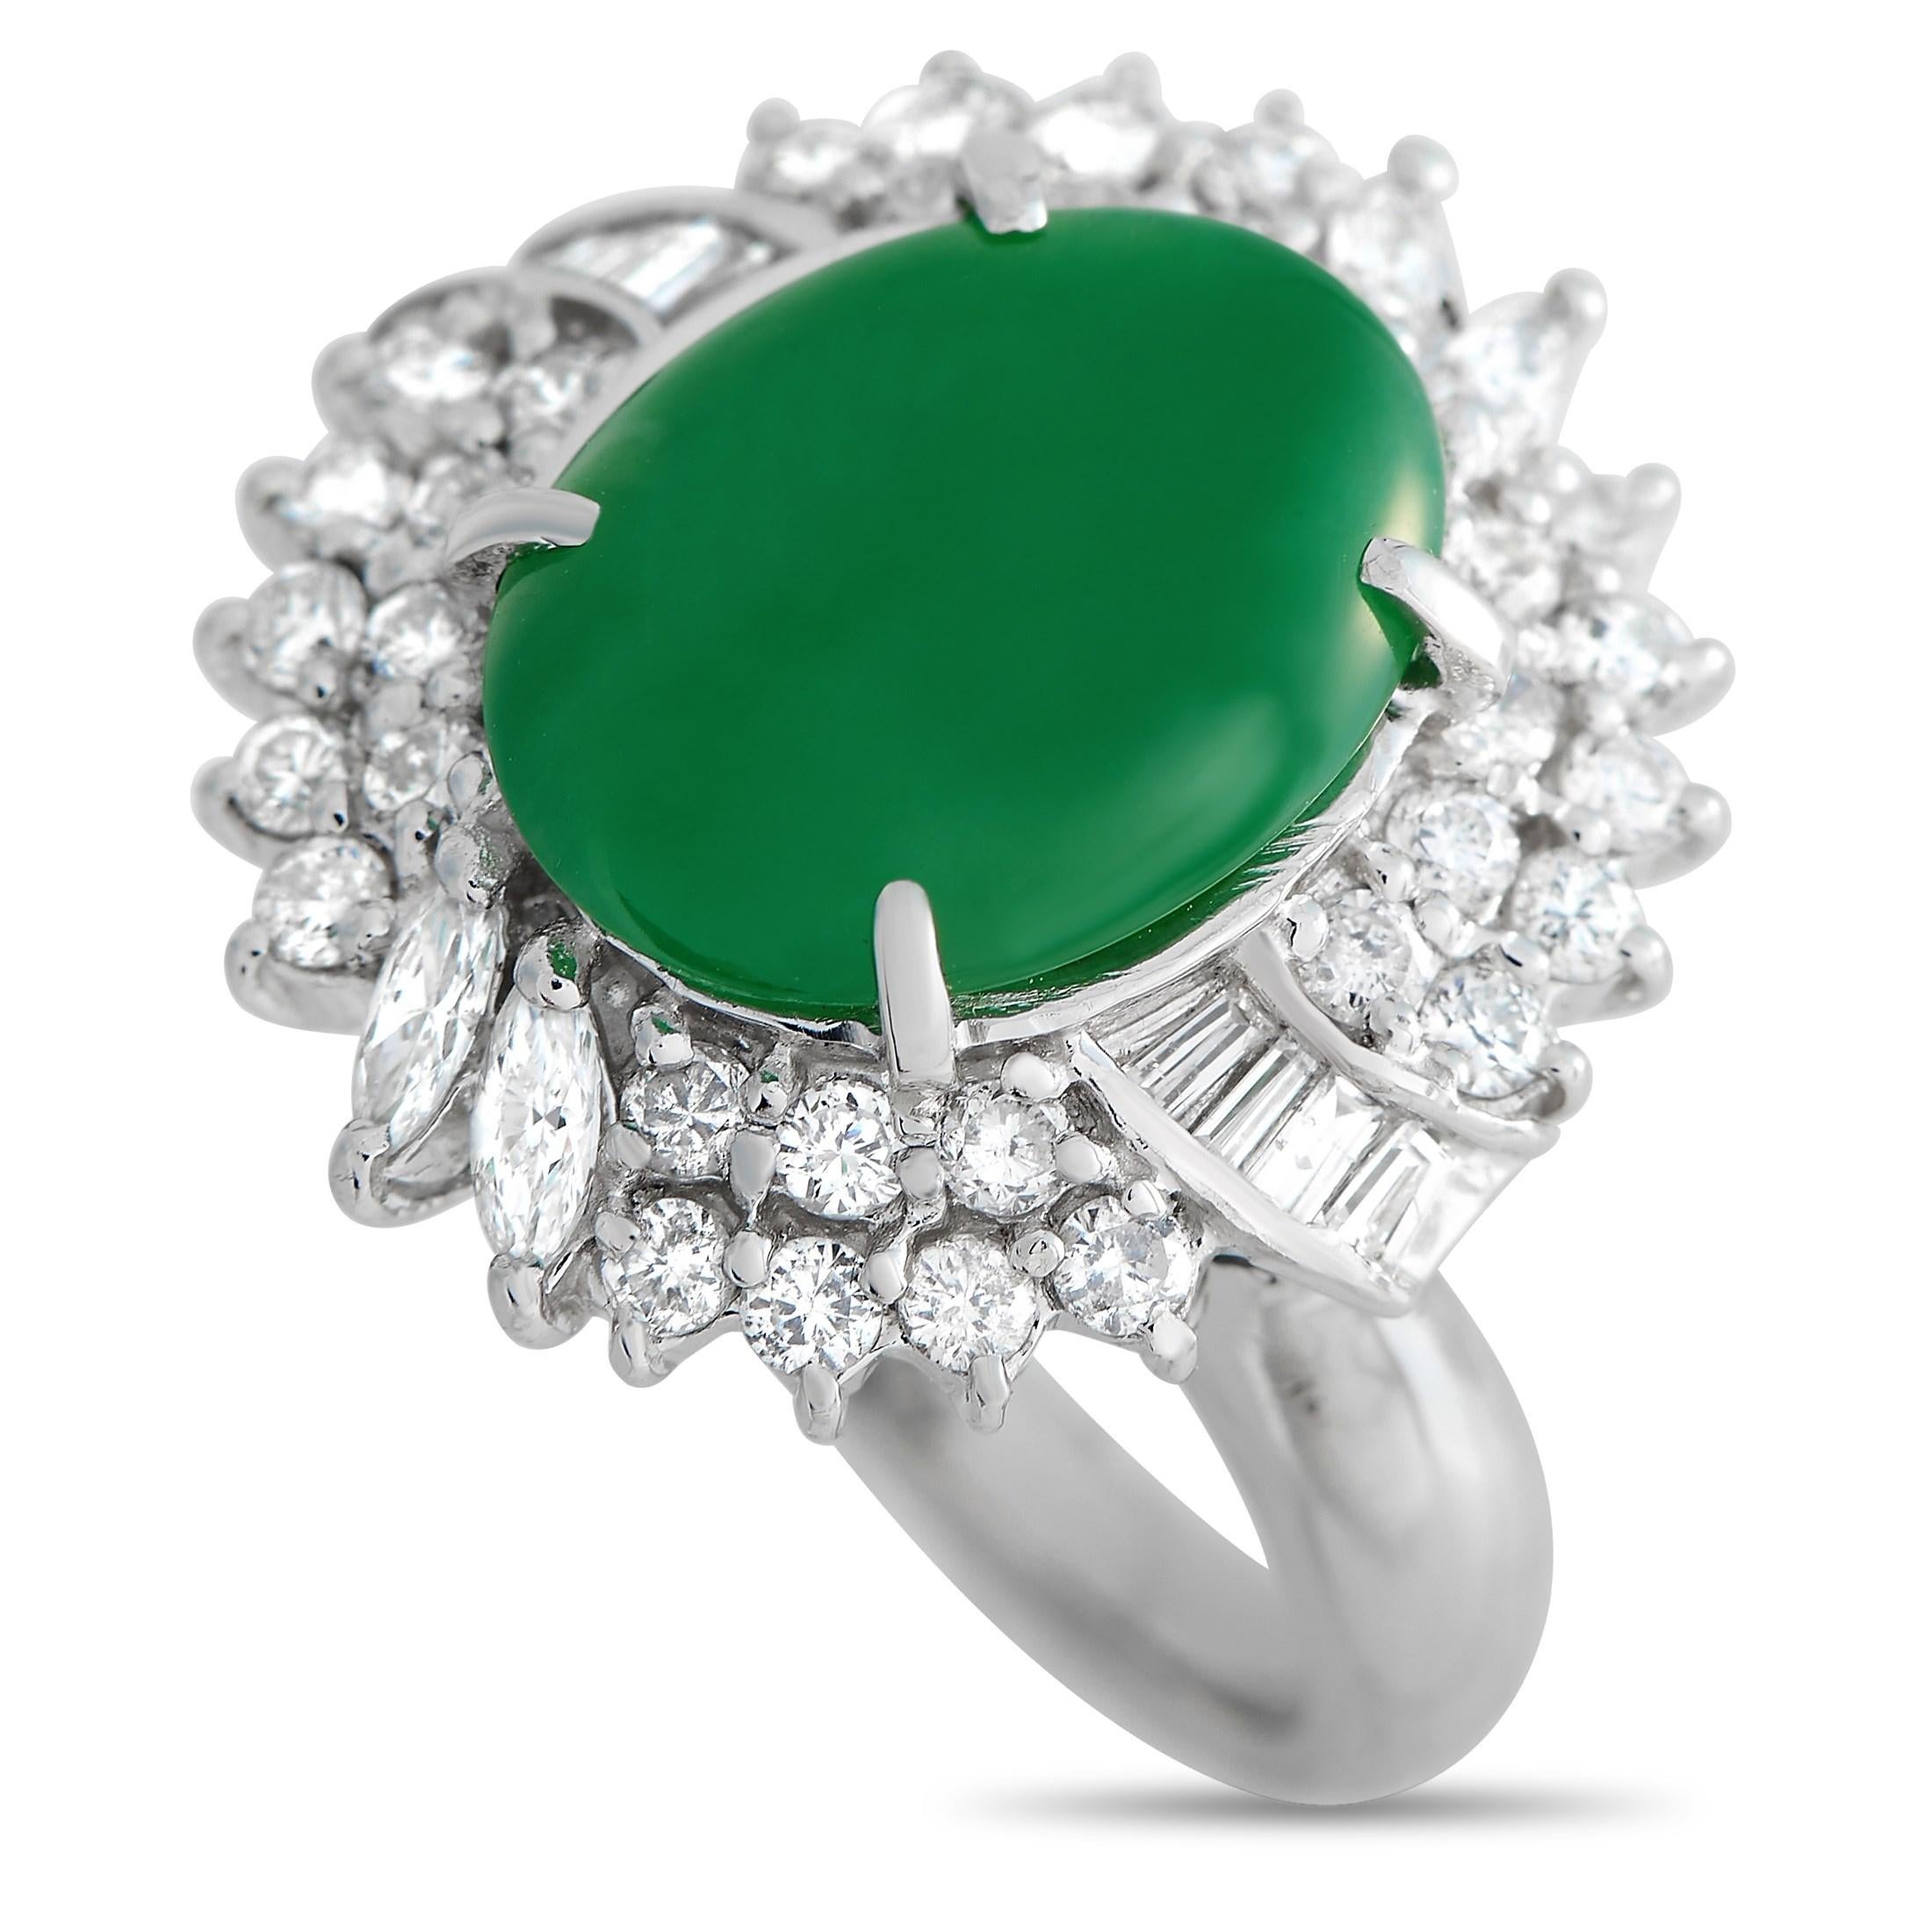 LB Exclusive Platinum 1.90 ct Diamond and Jade Ring In Excellent Condition For Sale In Southampton, PA